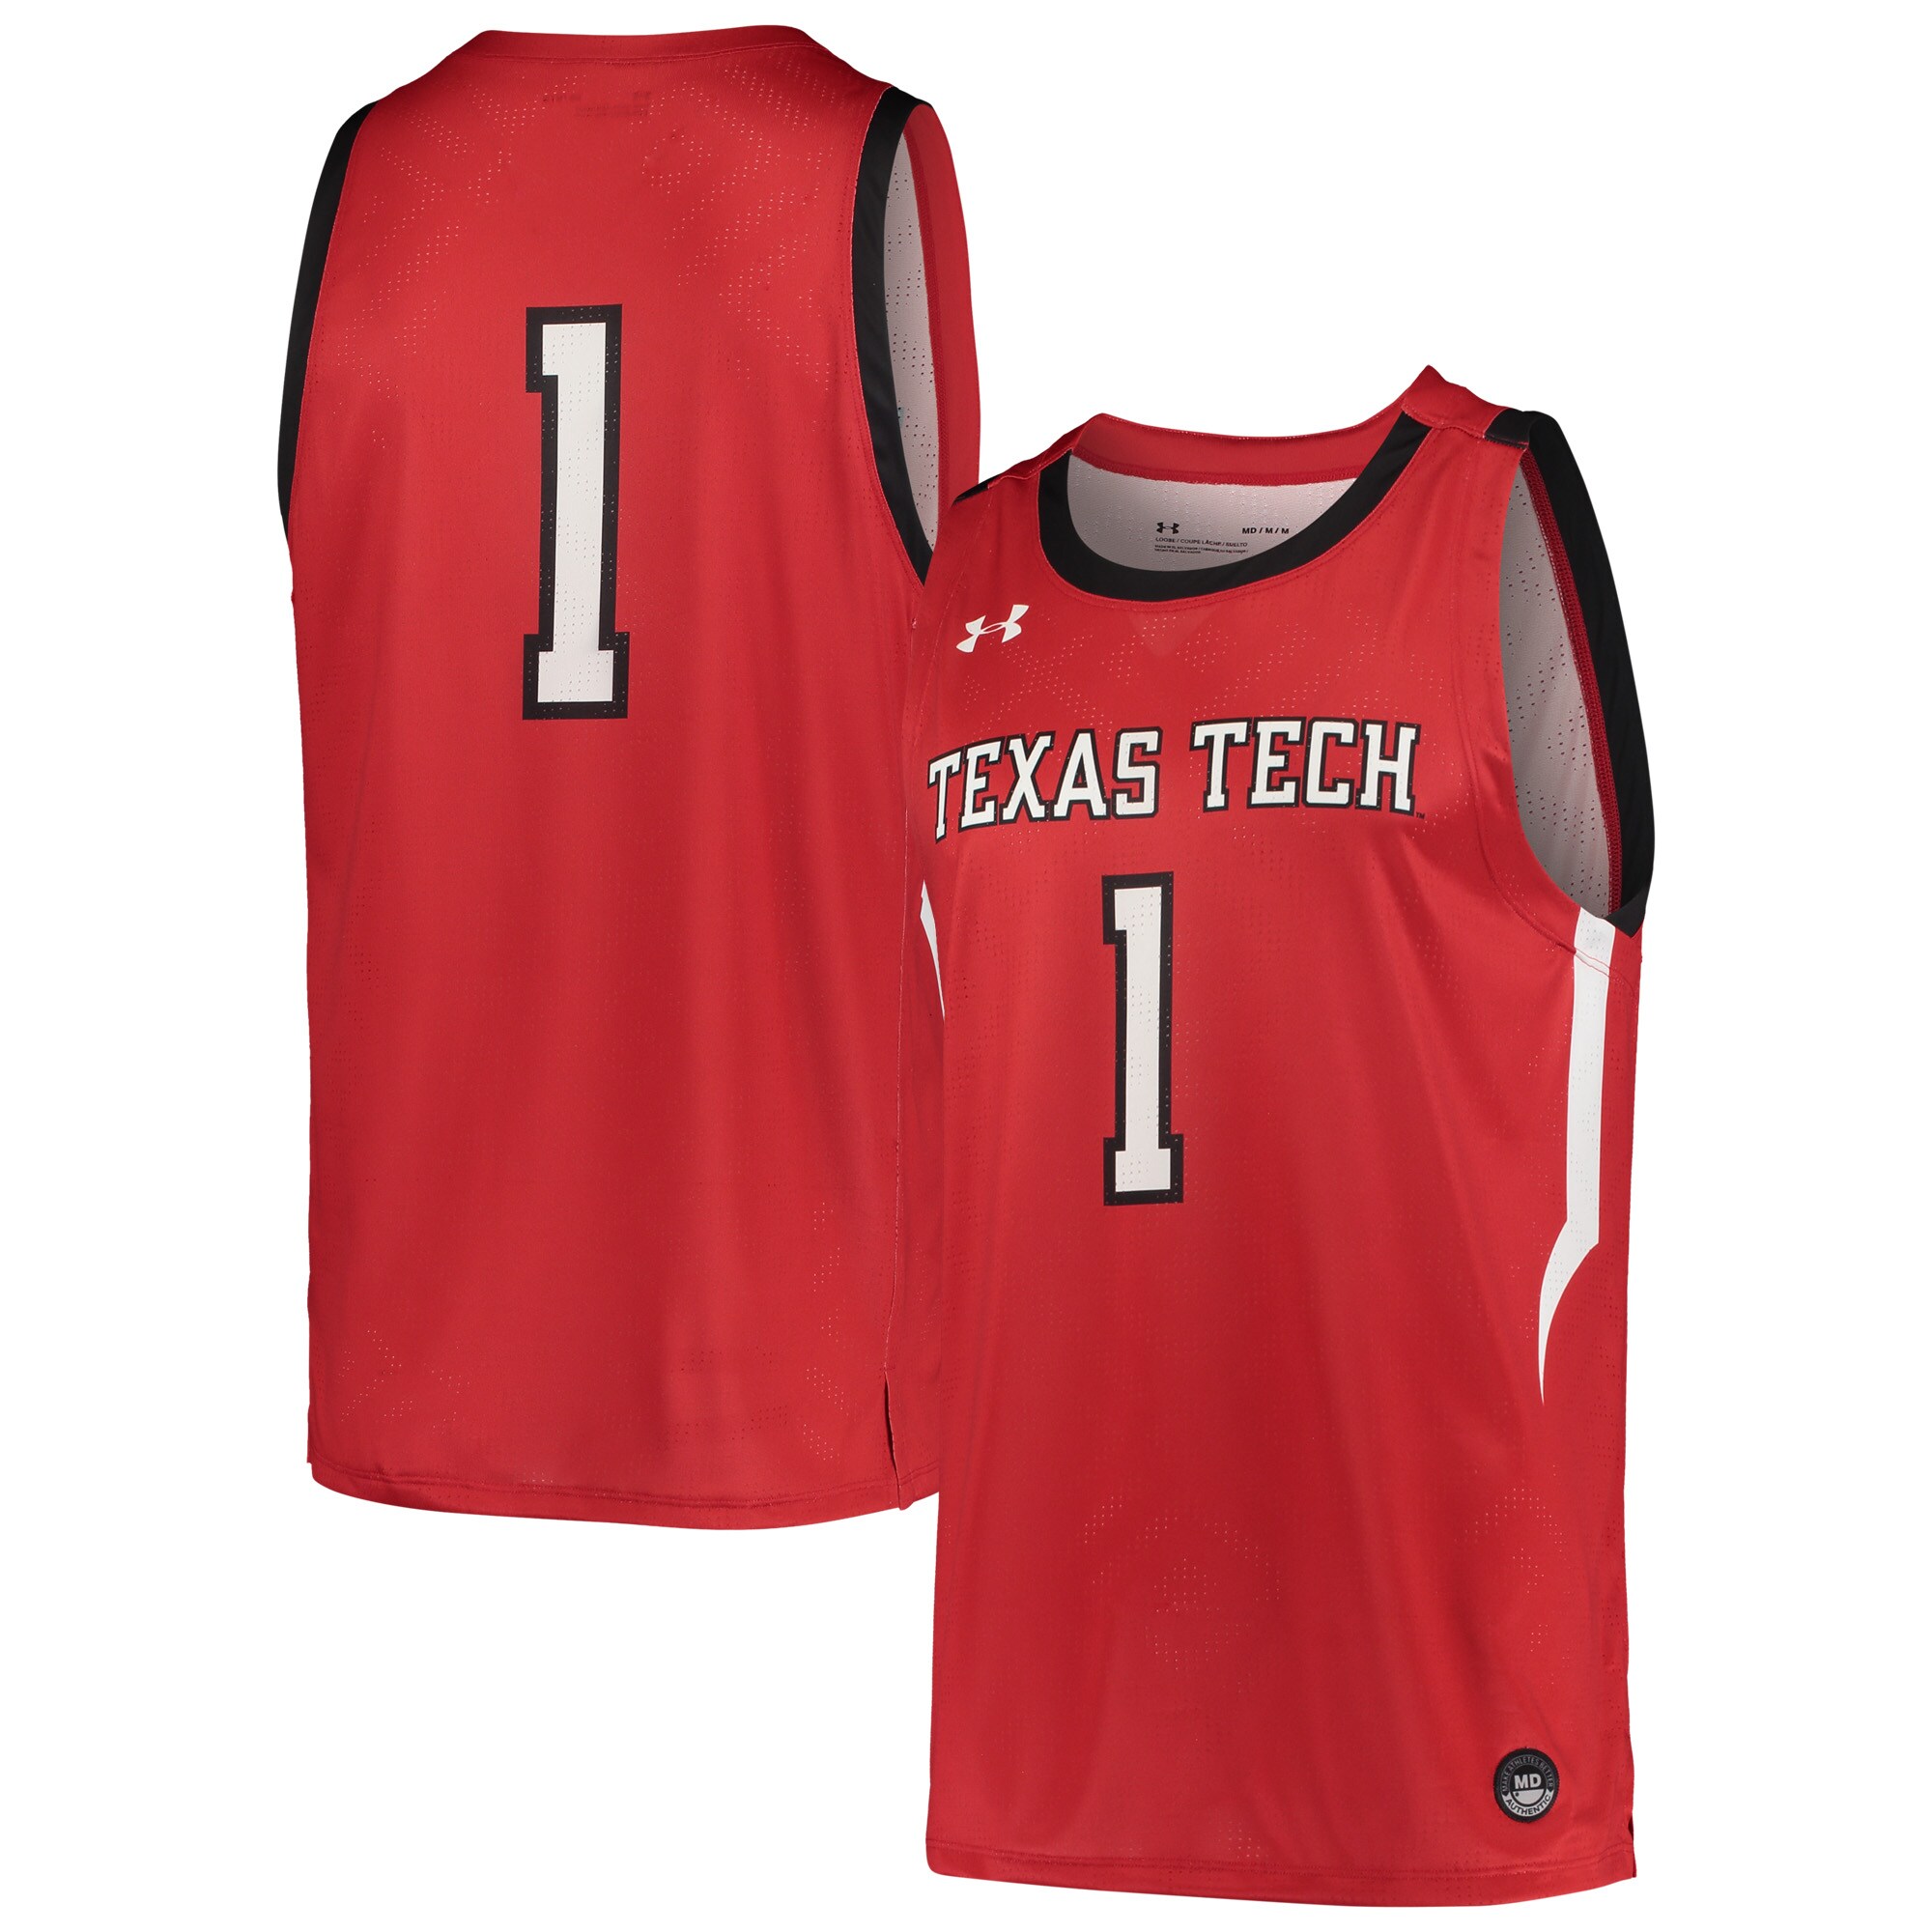 #1 Texas Tech Red Raiders Under Armour College Replica Basketball Jersey - Red For Youth Women Men